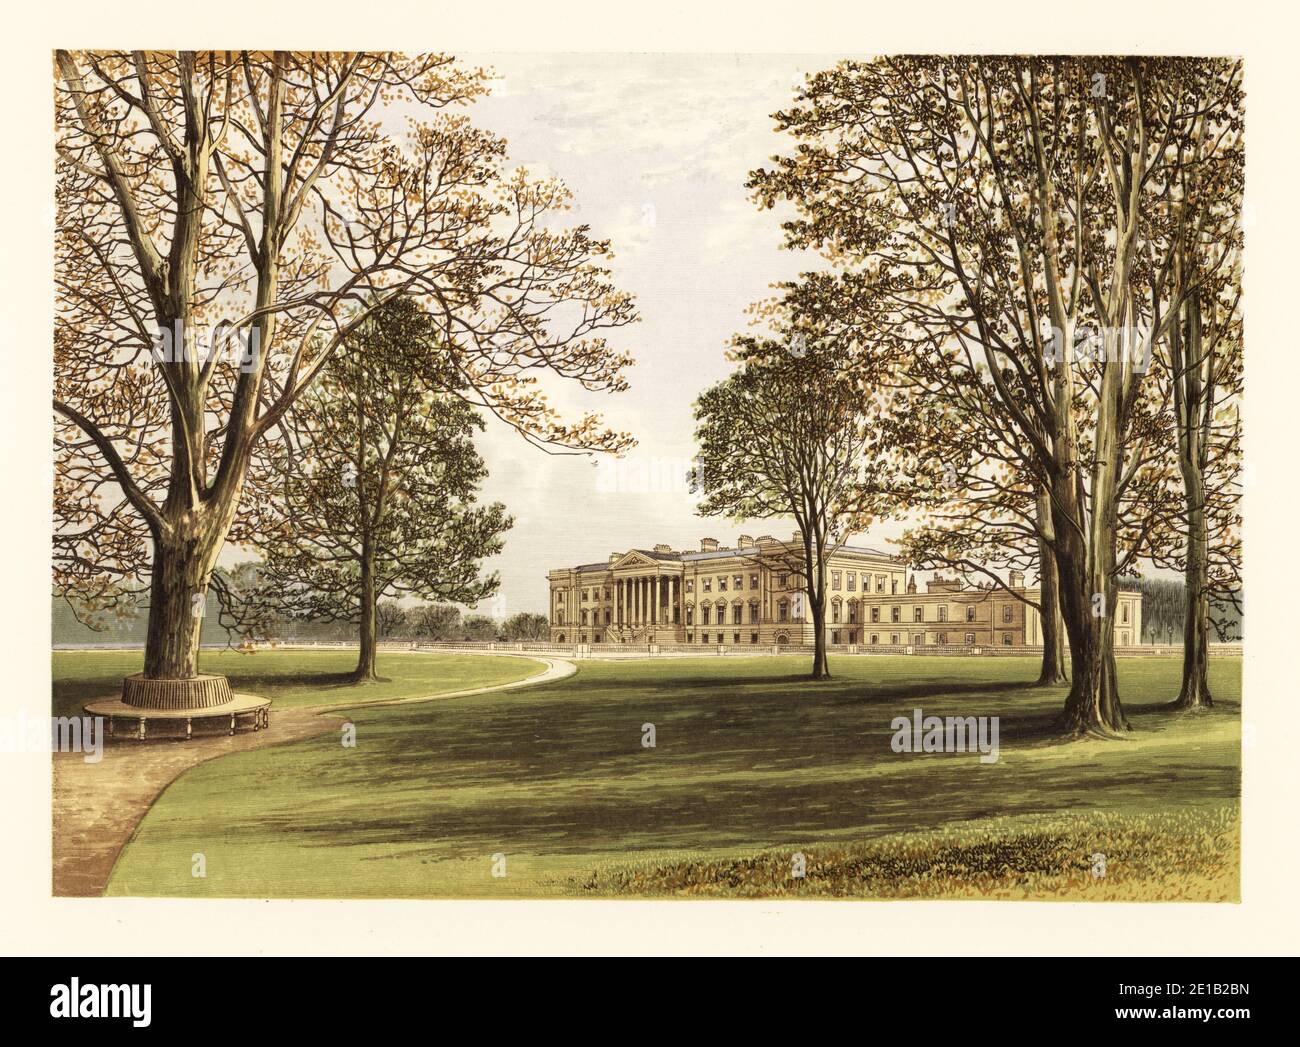 Hamilton Palace, Lanarkshire, Scotland. Neo-classical Palladian-style stately home with Corinthian pediment built by architect James Smith in 1695 for William Douglas-Hamilton, Duke of Hamilton, refurbished in the Regency era by David Hamilton from plans by WIlliam Adam. Colour woodblock by Benjamin Fawcett in the Baxter process of an illustration by Alexander Francis Lydon from Reverend Francis Orpen Morris’s Picturesque Views of the Seats of Noblemen and Gentlemen of Great Britain and Ireland, William Mackenzie, London, 1880. Stock Photo